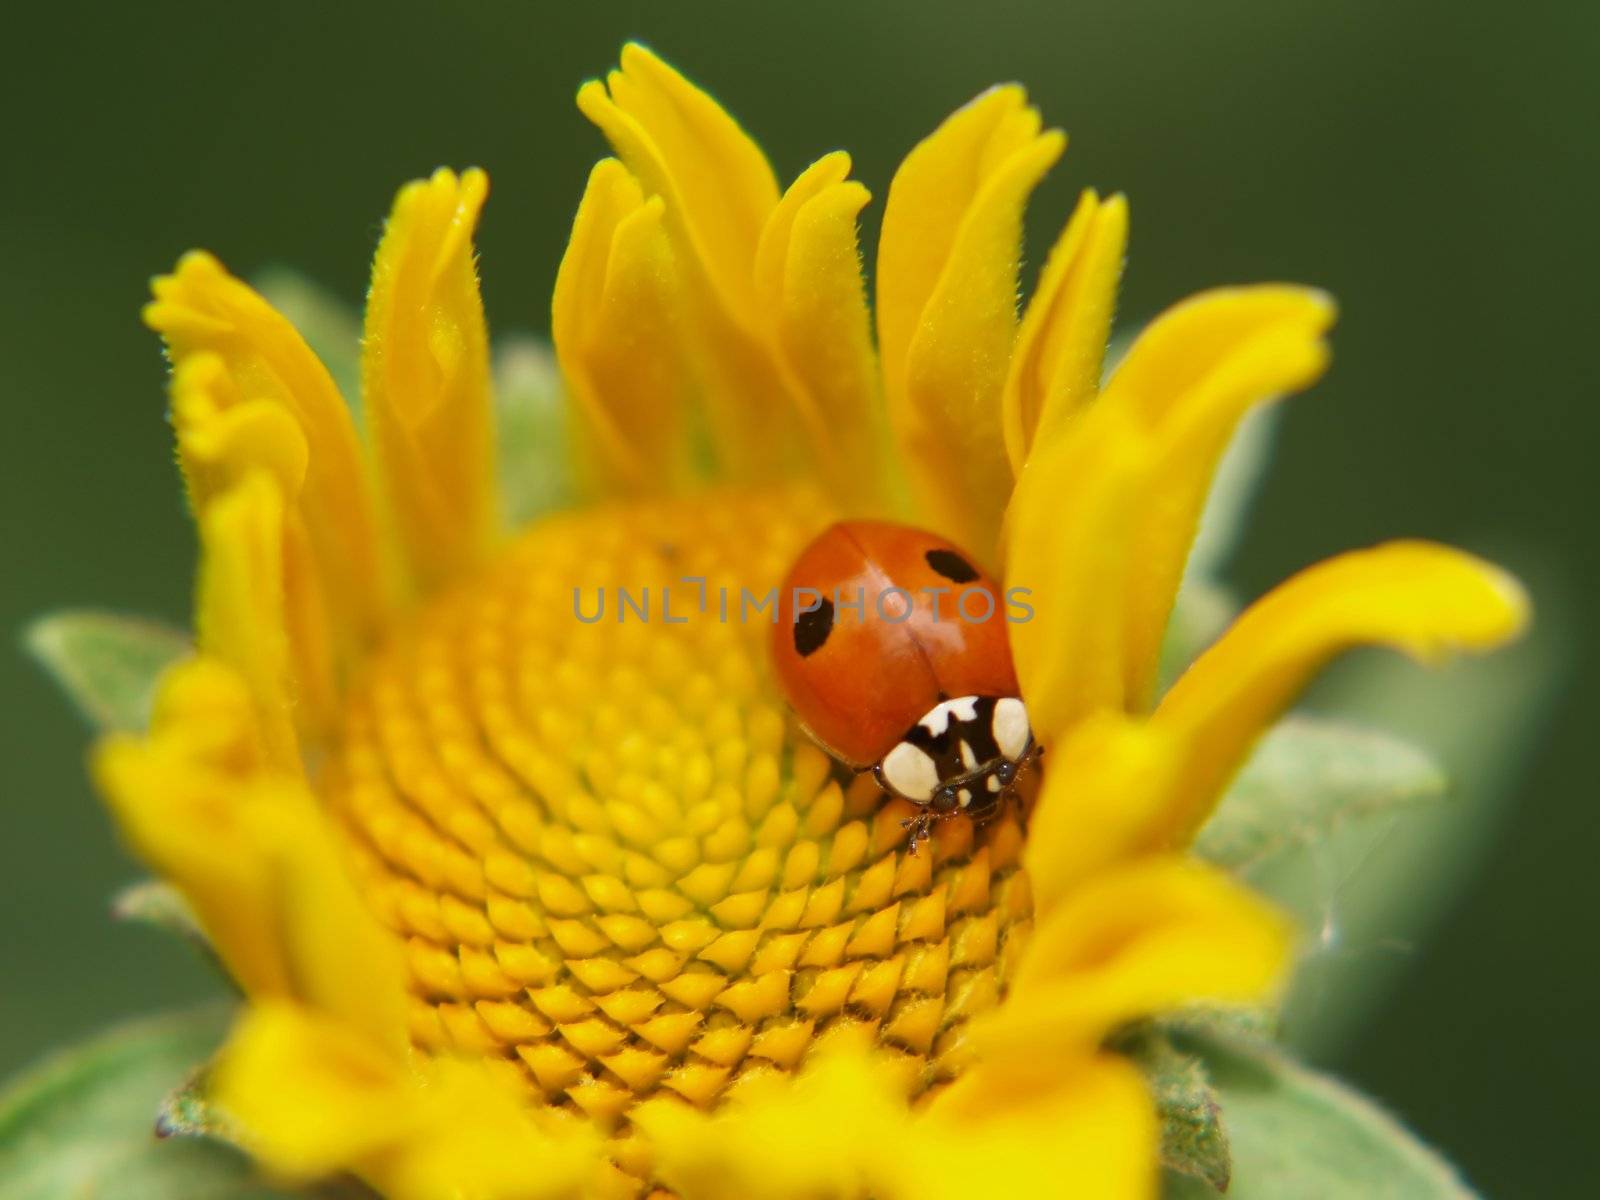 Ladybird on a yellow flower by anderm